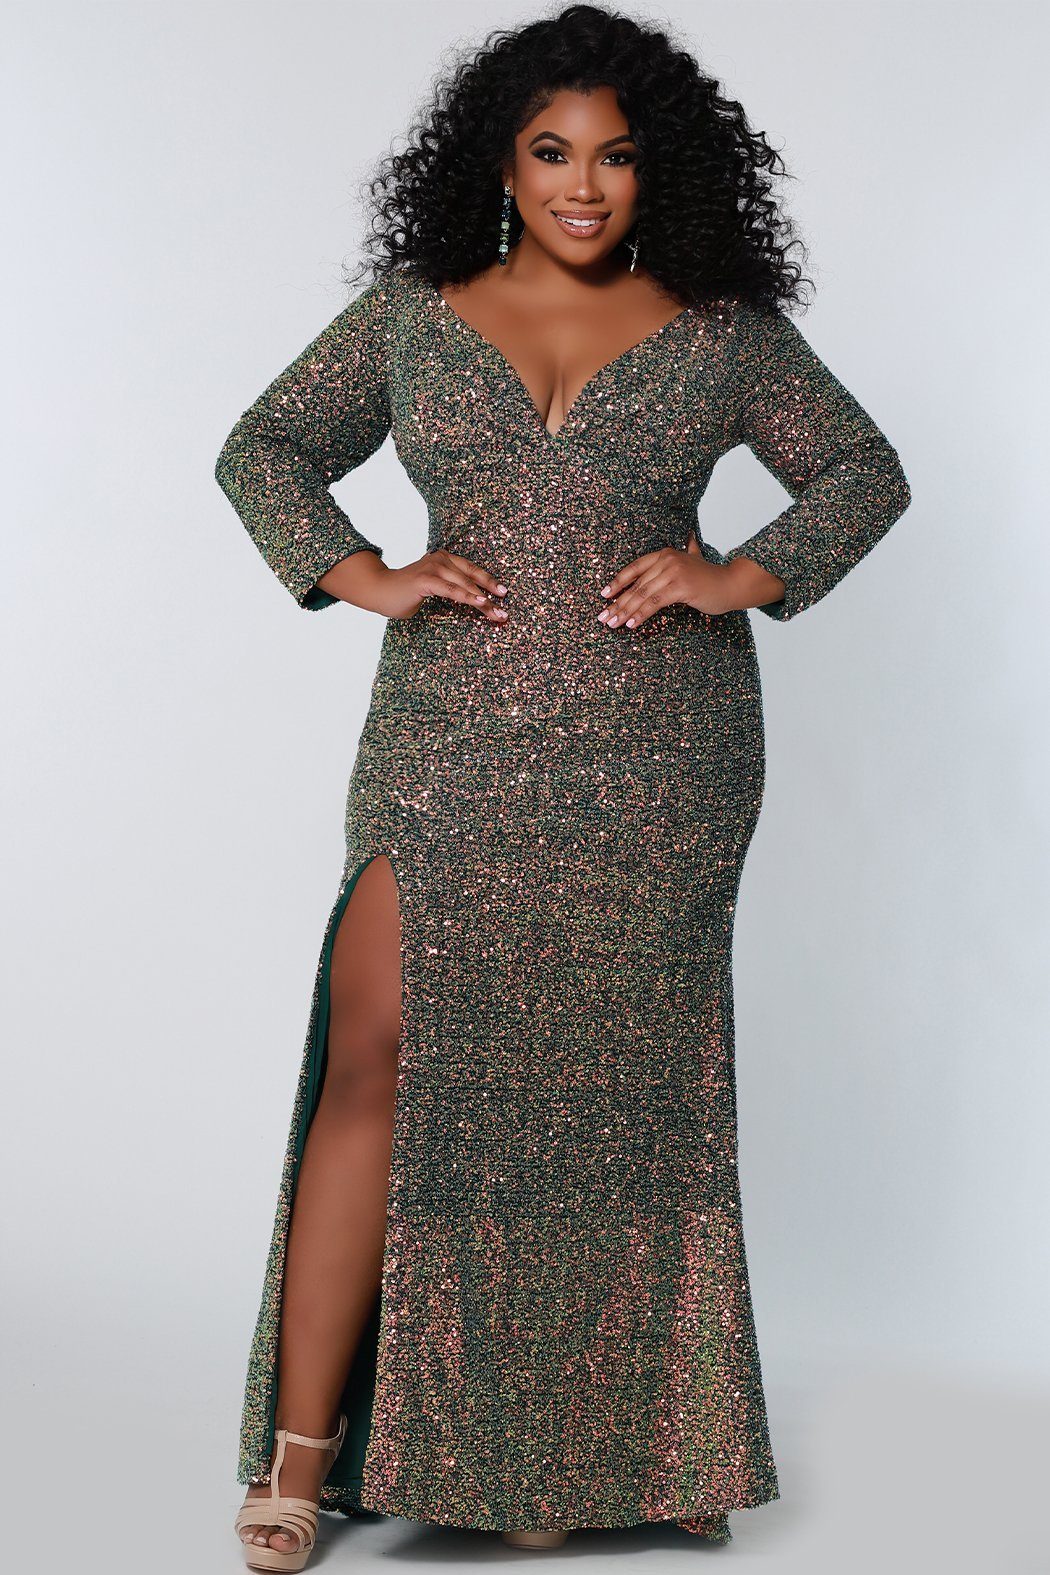 Angela and Alison Long Plus Size Prom 21091W Le Femme Boutique Allentown PA  - Formal Eveningwear, Prom, Bridal, Mother of the Wedding, Quinceanera,  Tuxedos